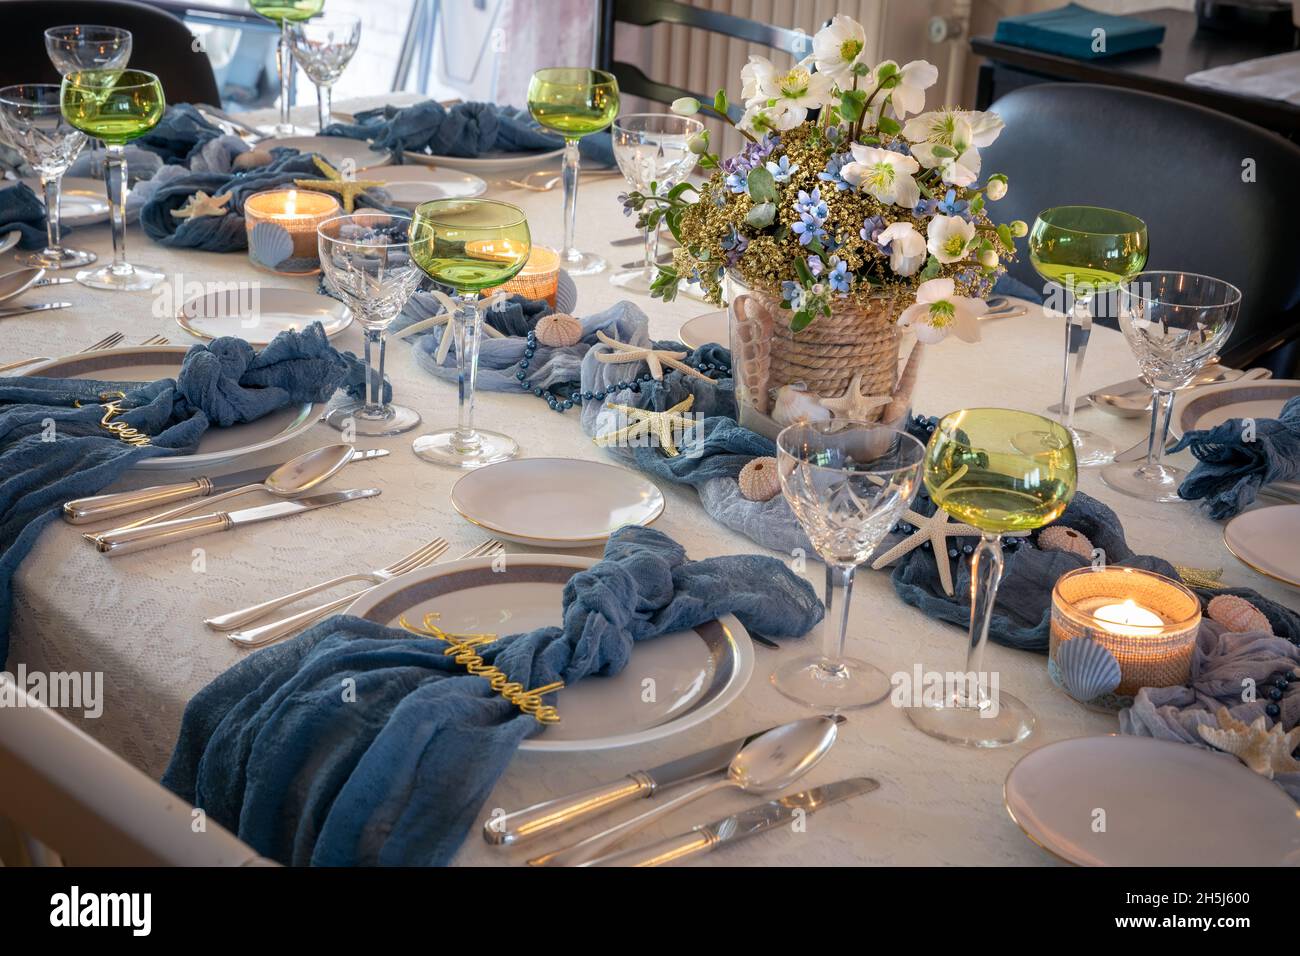 Christmas dinner table decorations in blues and gold following a beach theme with seashells and starfish Stock Photo